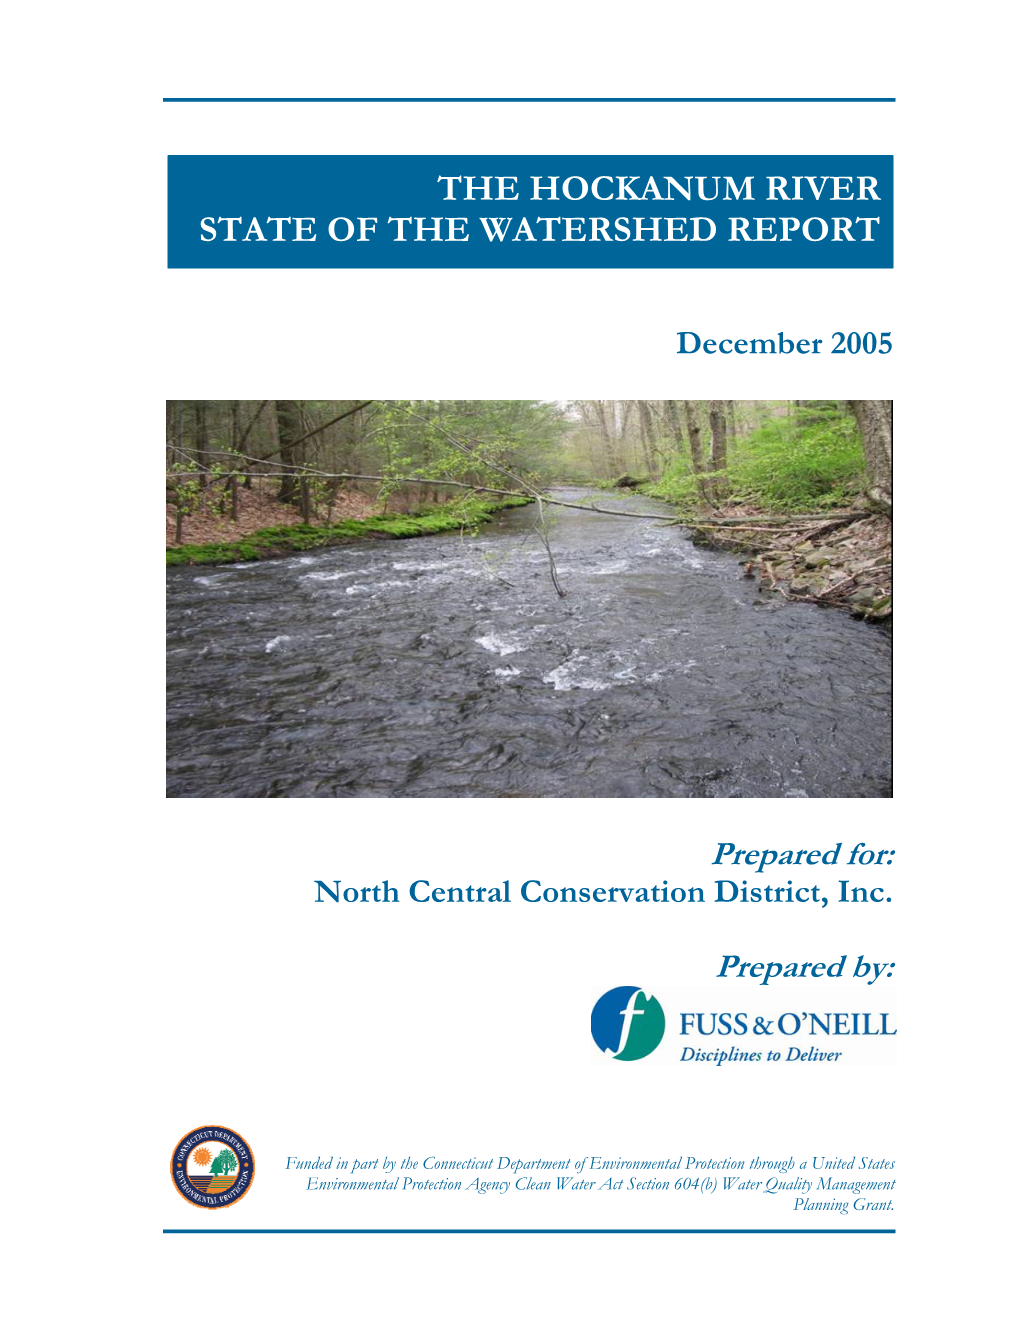 State of the Watershed Report the Hockanum River